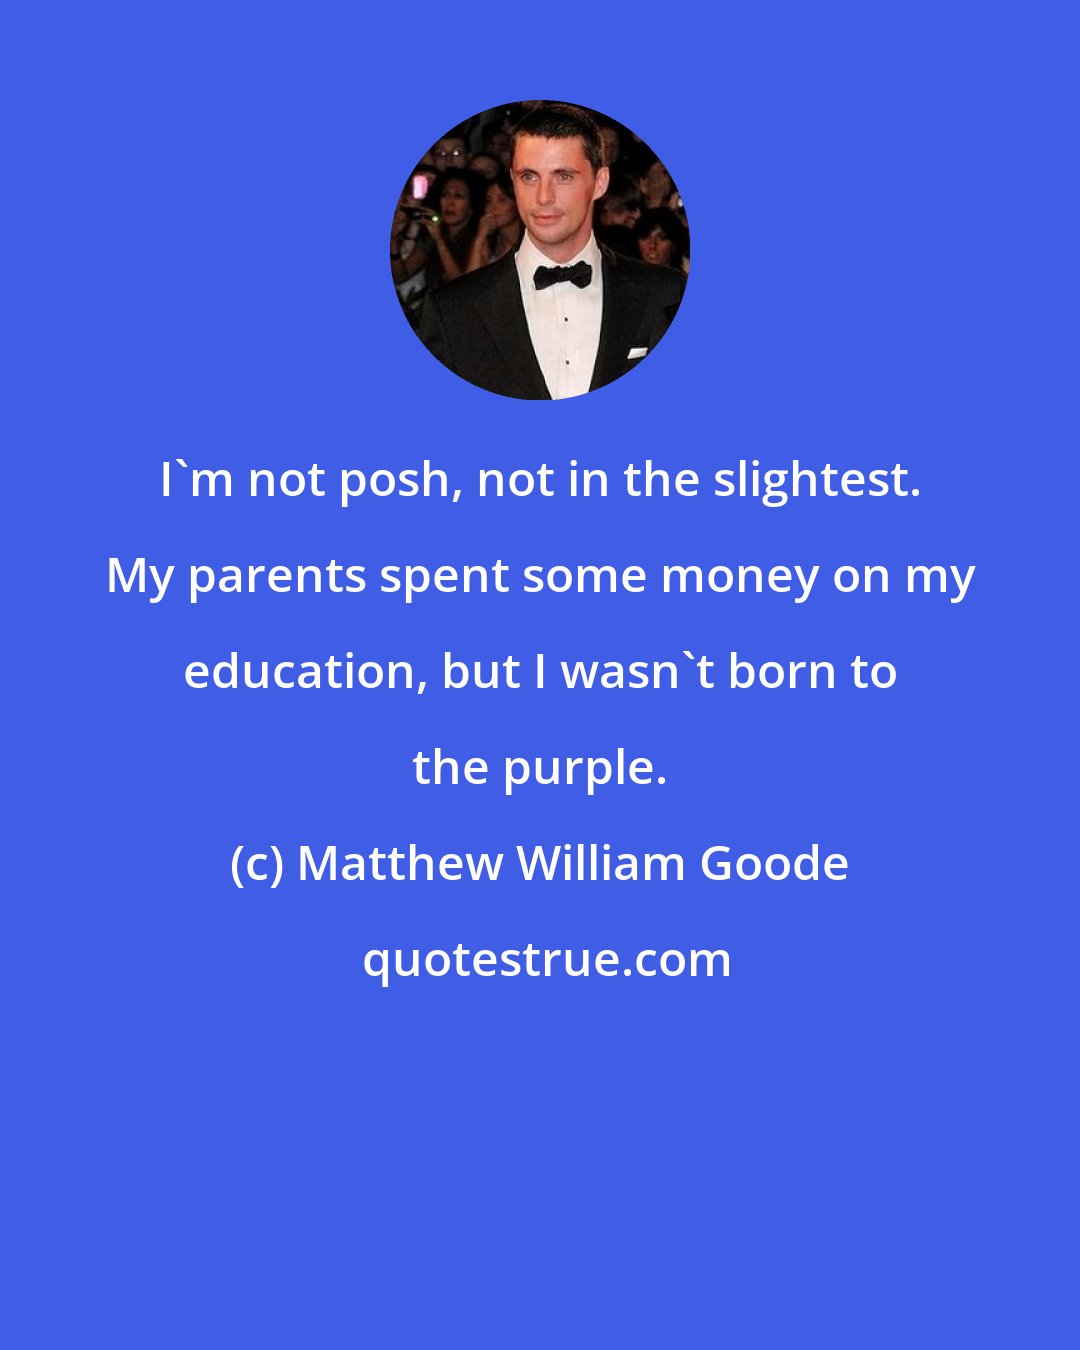 Matthew William Goode: I'm not posh, not in the slightest. My parents spent some money on my education, but I wasn't born to the purple.